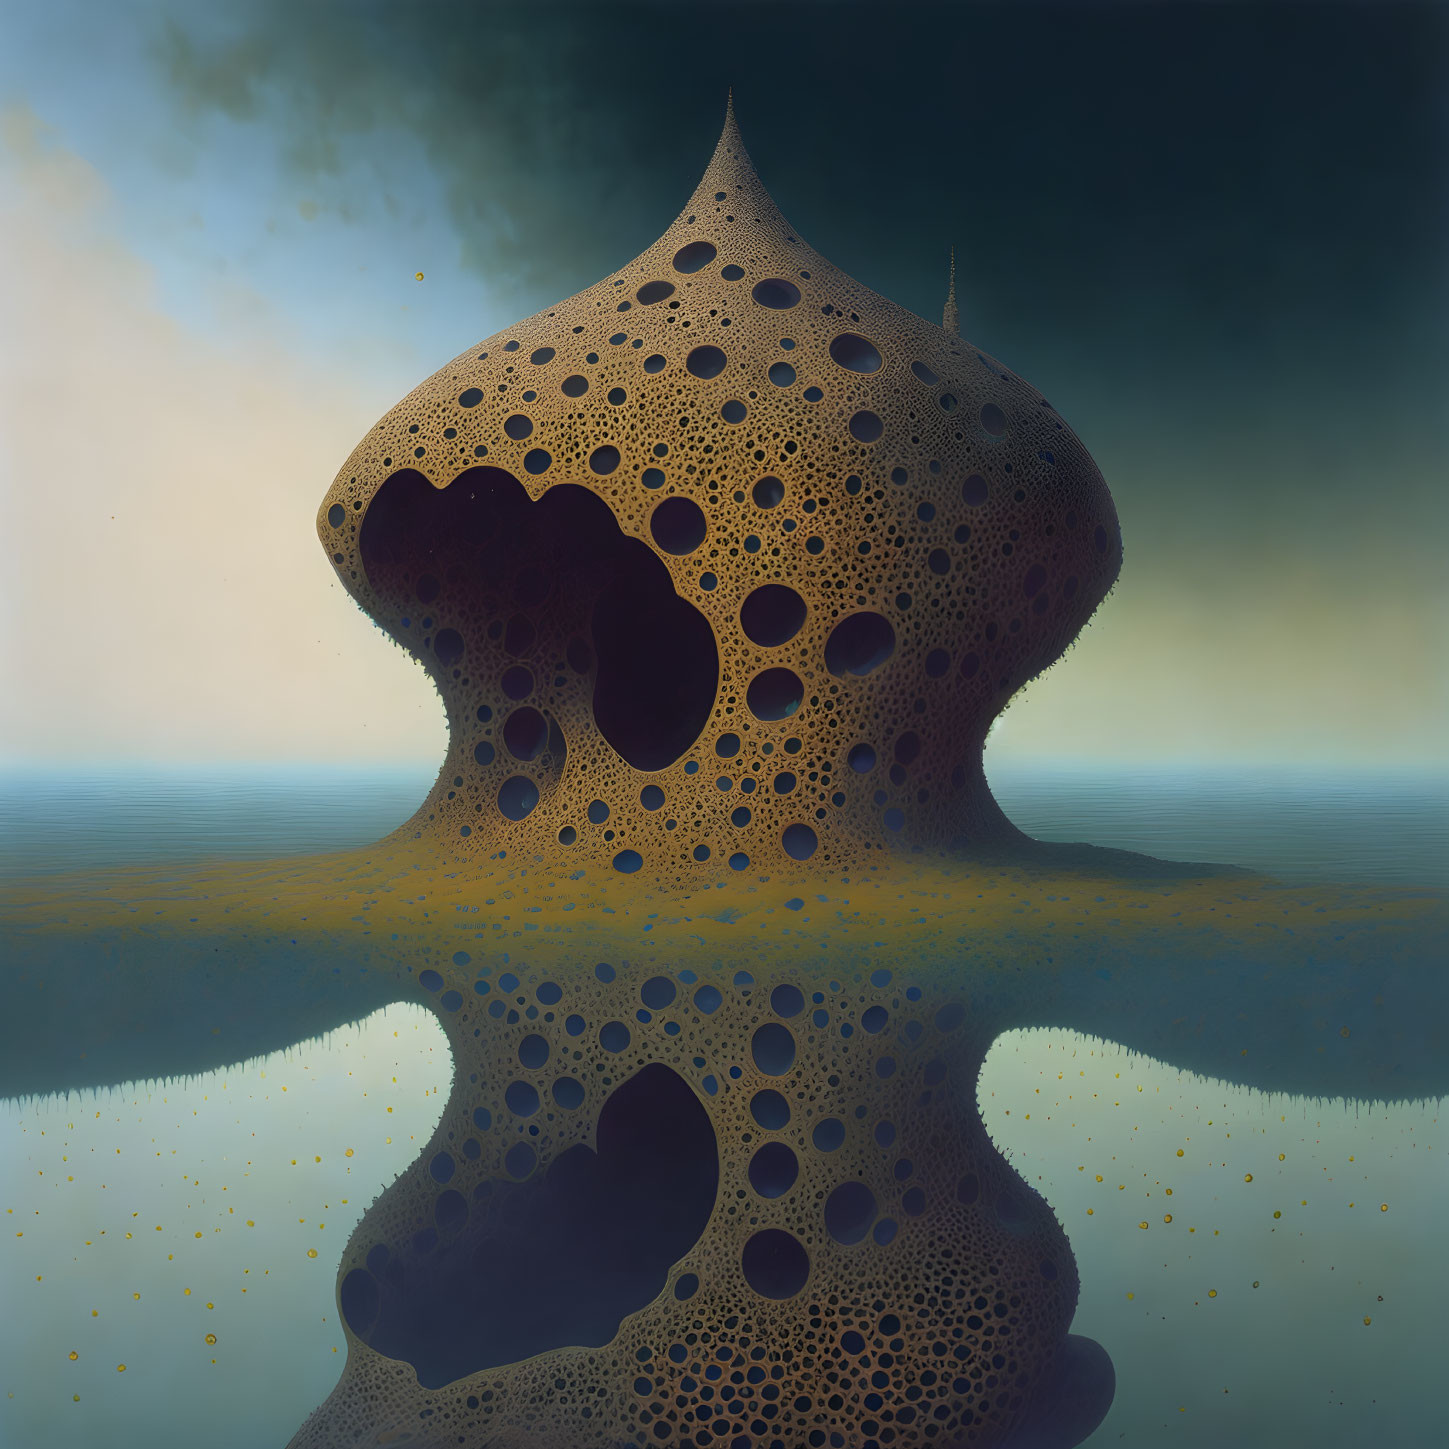 Amorphous, Perforated Structure in Surreal Landscape